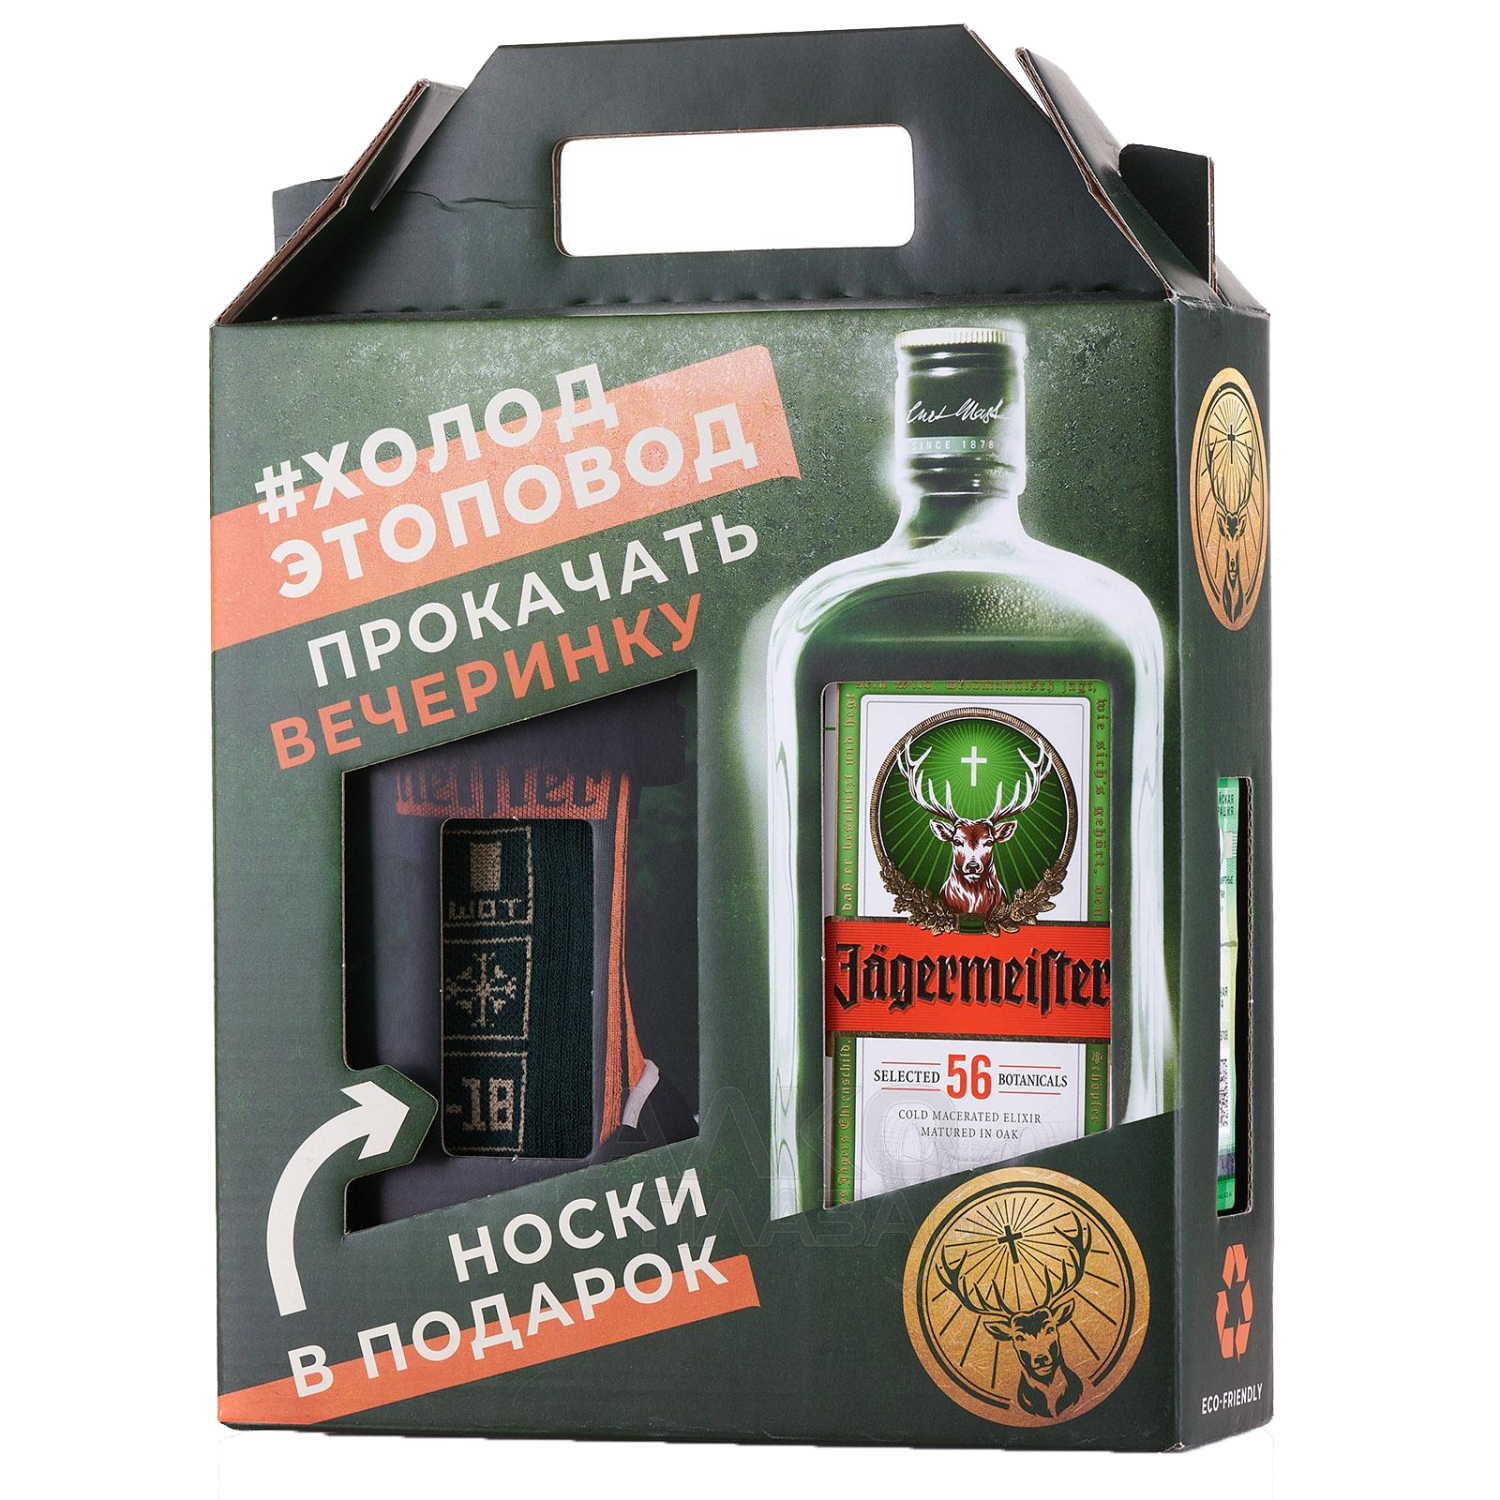 Jagermeister (gift box with socks) jagermeister gift box with shot